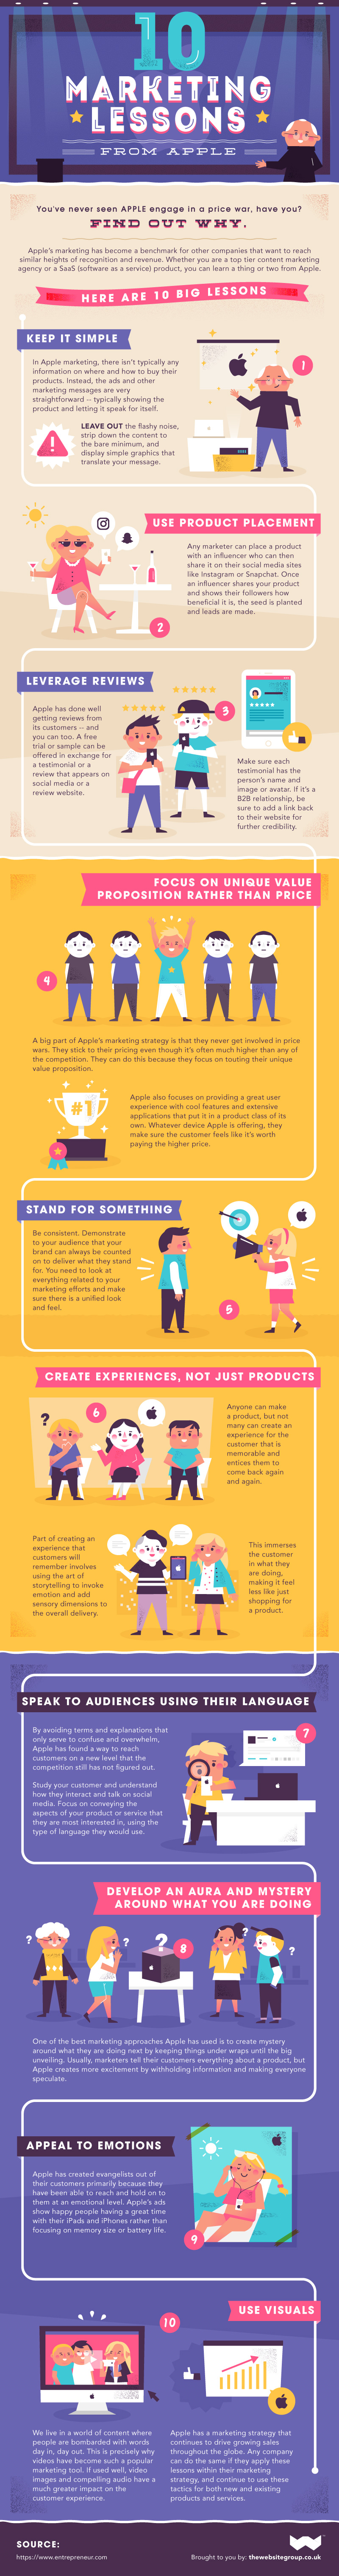 10 Marketing Lessons from Apple in an Infographic